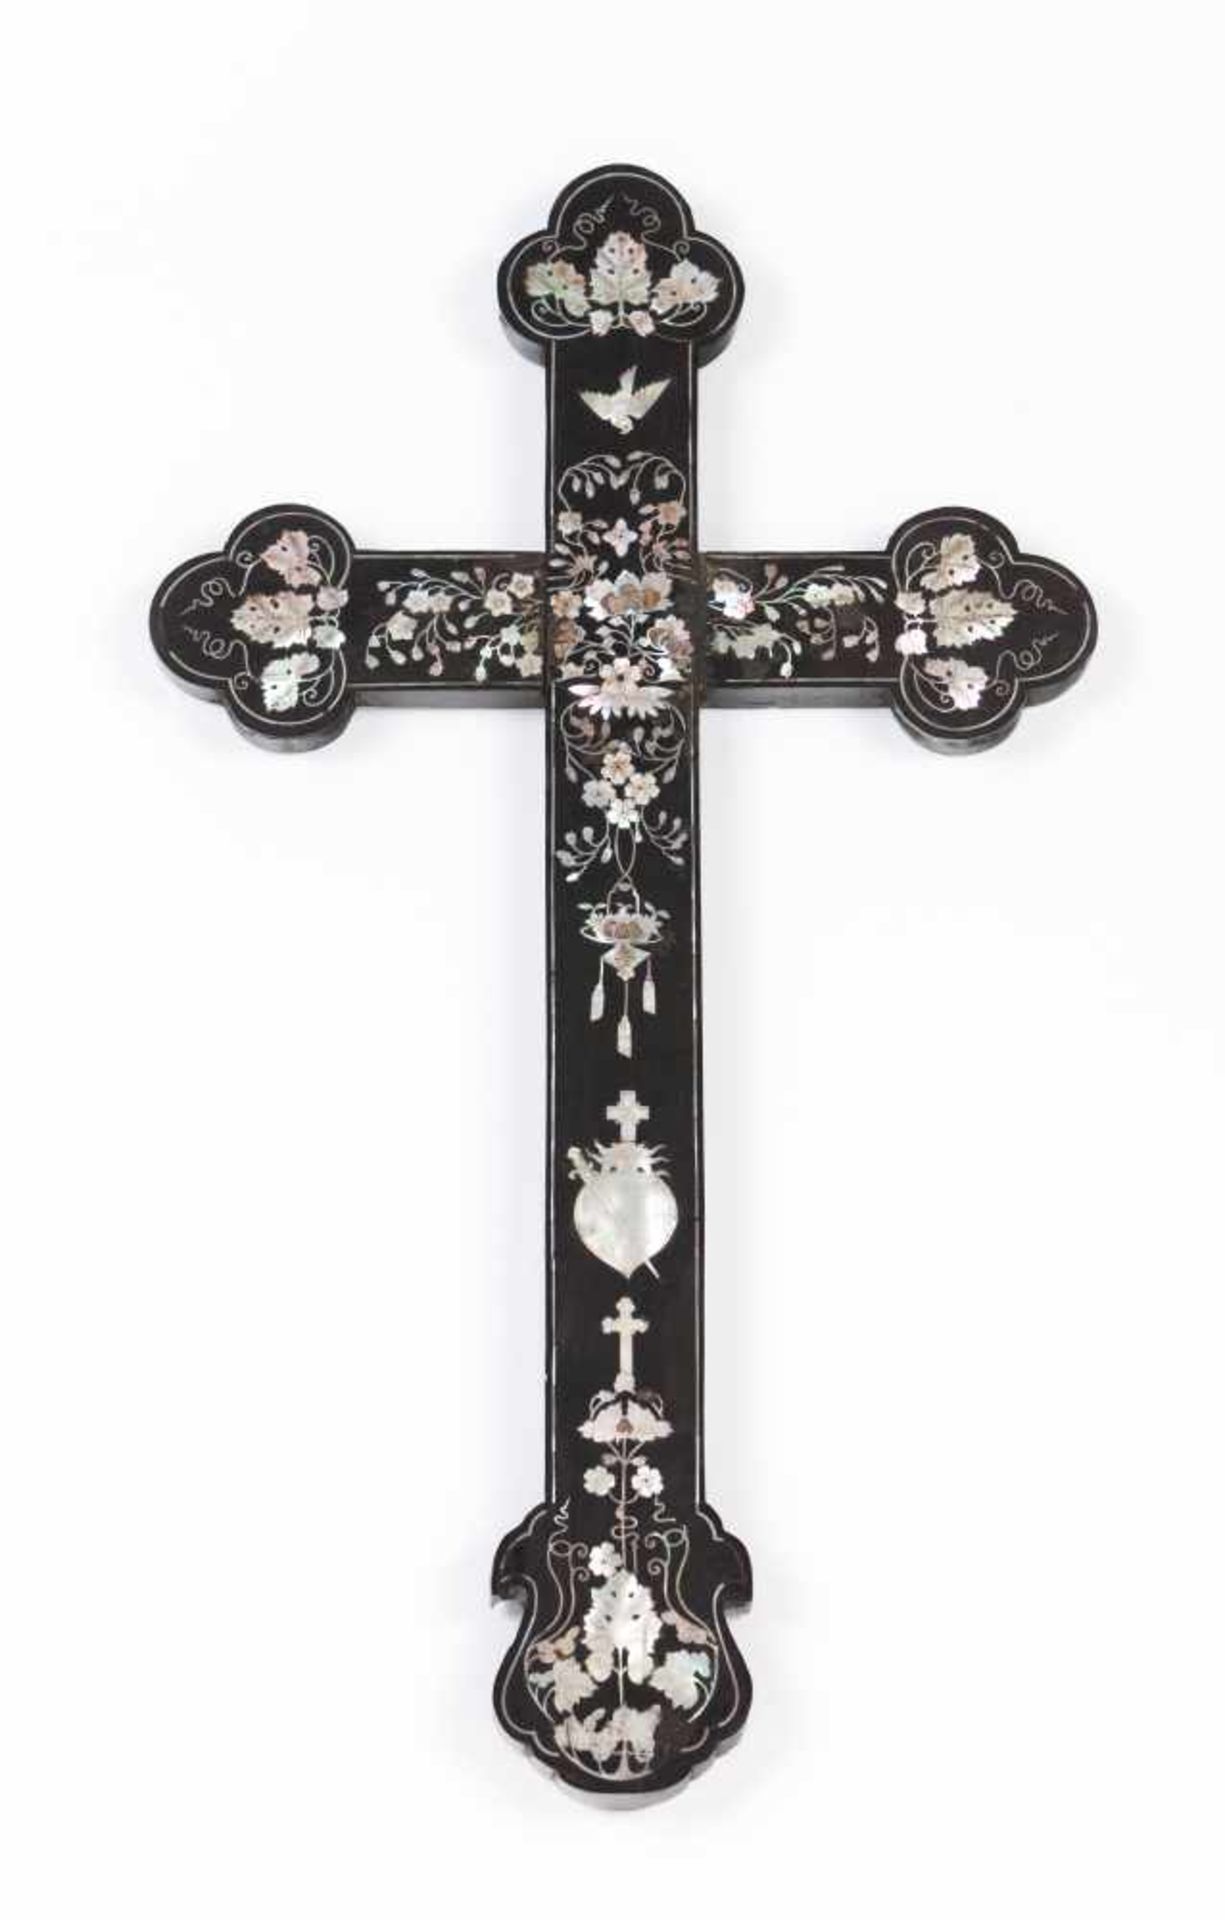 A crucifixEbonyDecorated in mother-of-pearl inlay with foliage scroll motifs, dove and flaming heart